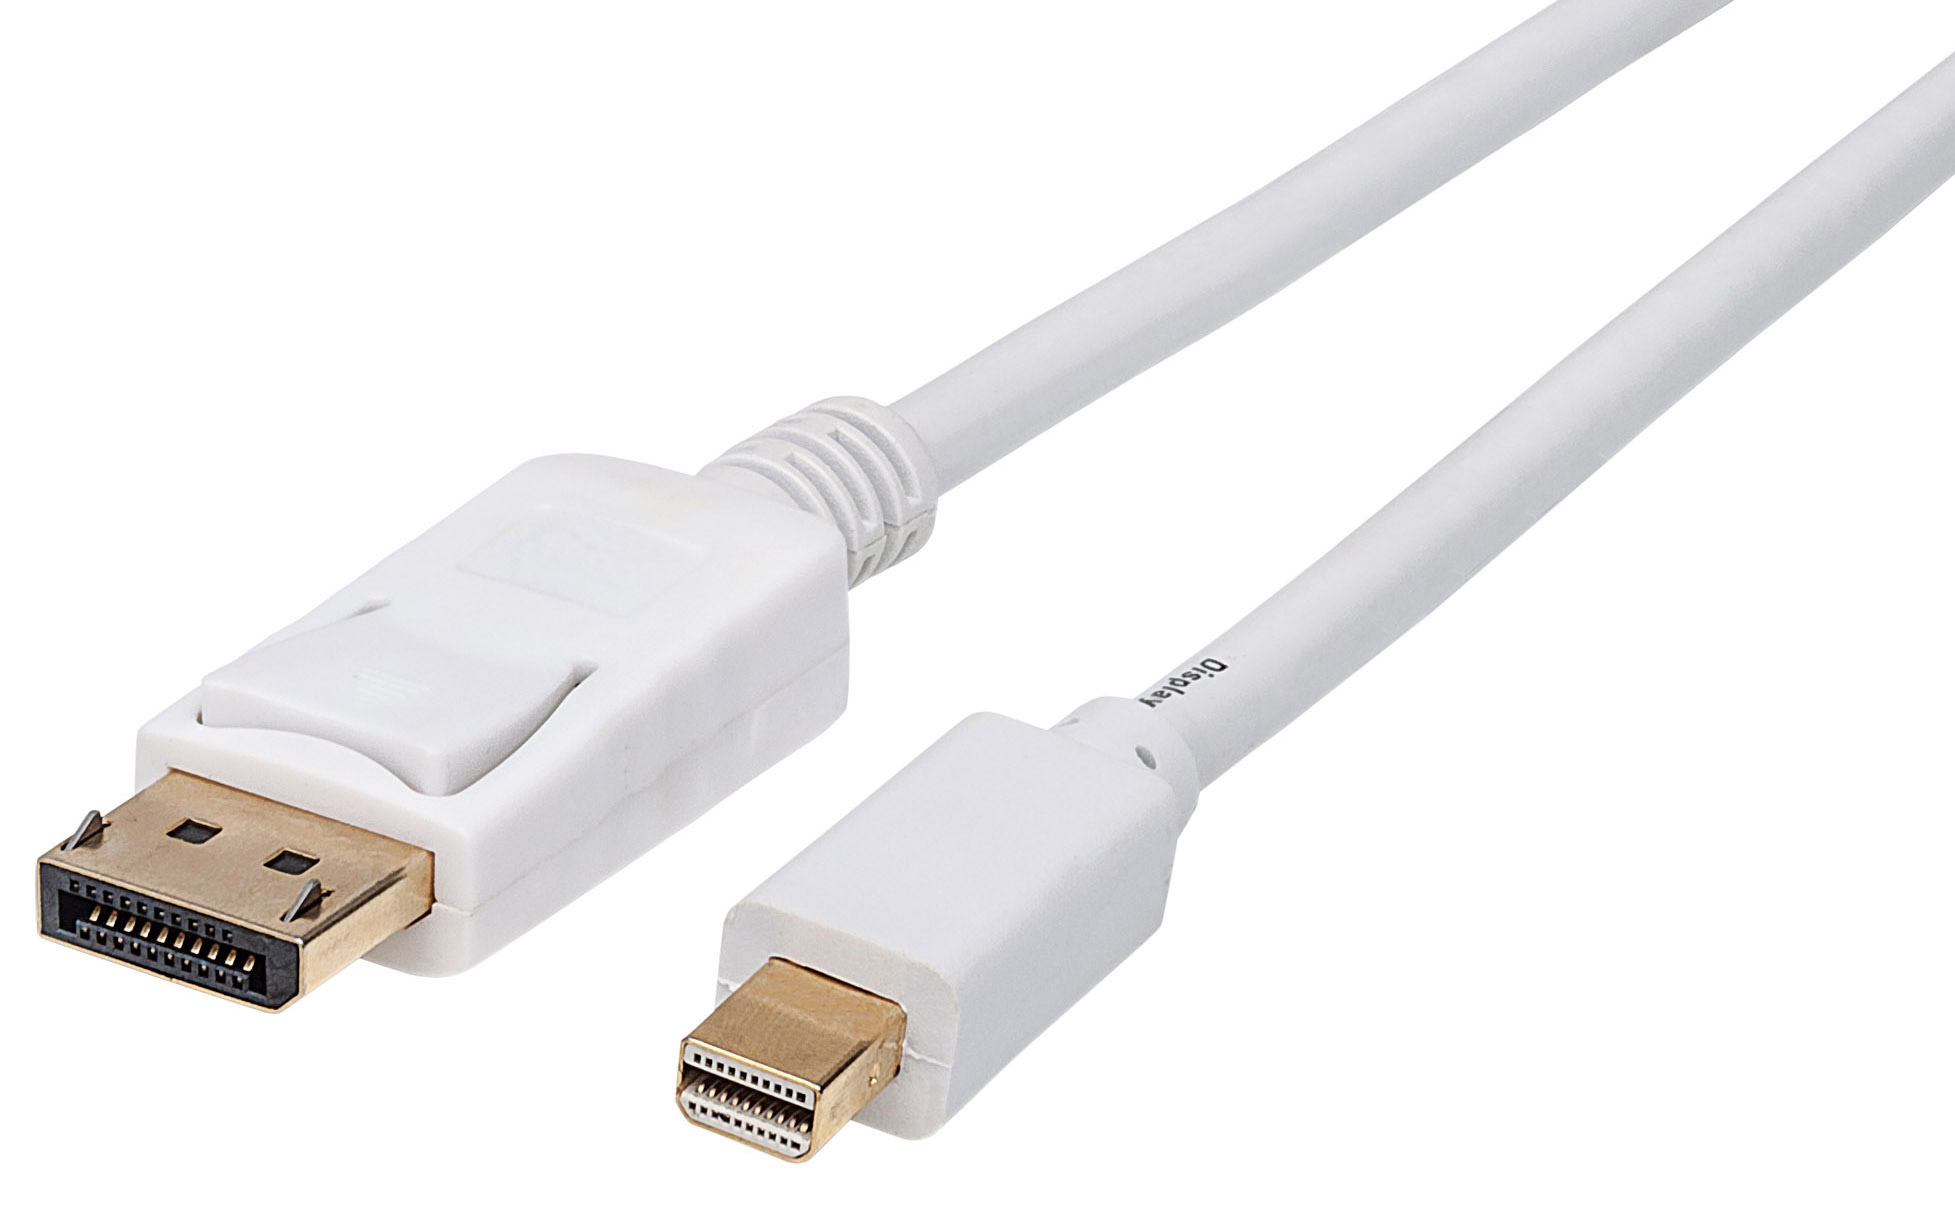 Pro 3 MacBook Air,etc 6 Feet/1.8m, White Mini DisplayPort to DisplayPort Cable CABLETIME Mini DP to DP Cord Support Video and Audio,Thunderbolt Compatible for Surface Pro 5 Pro 4 